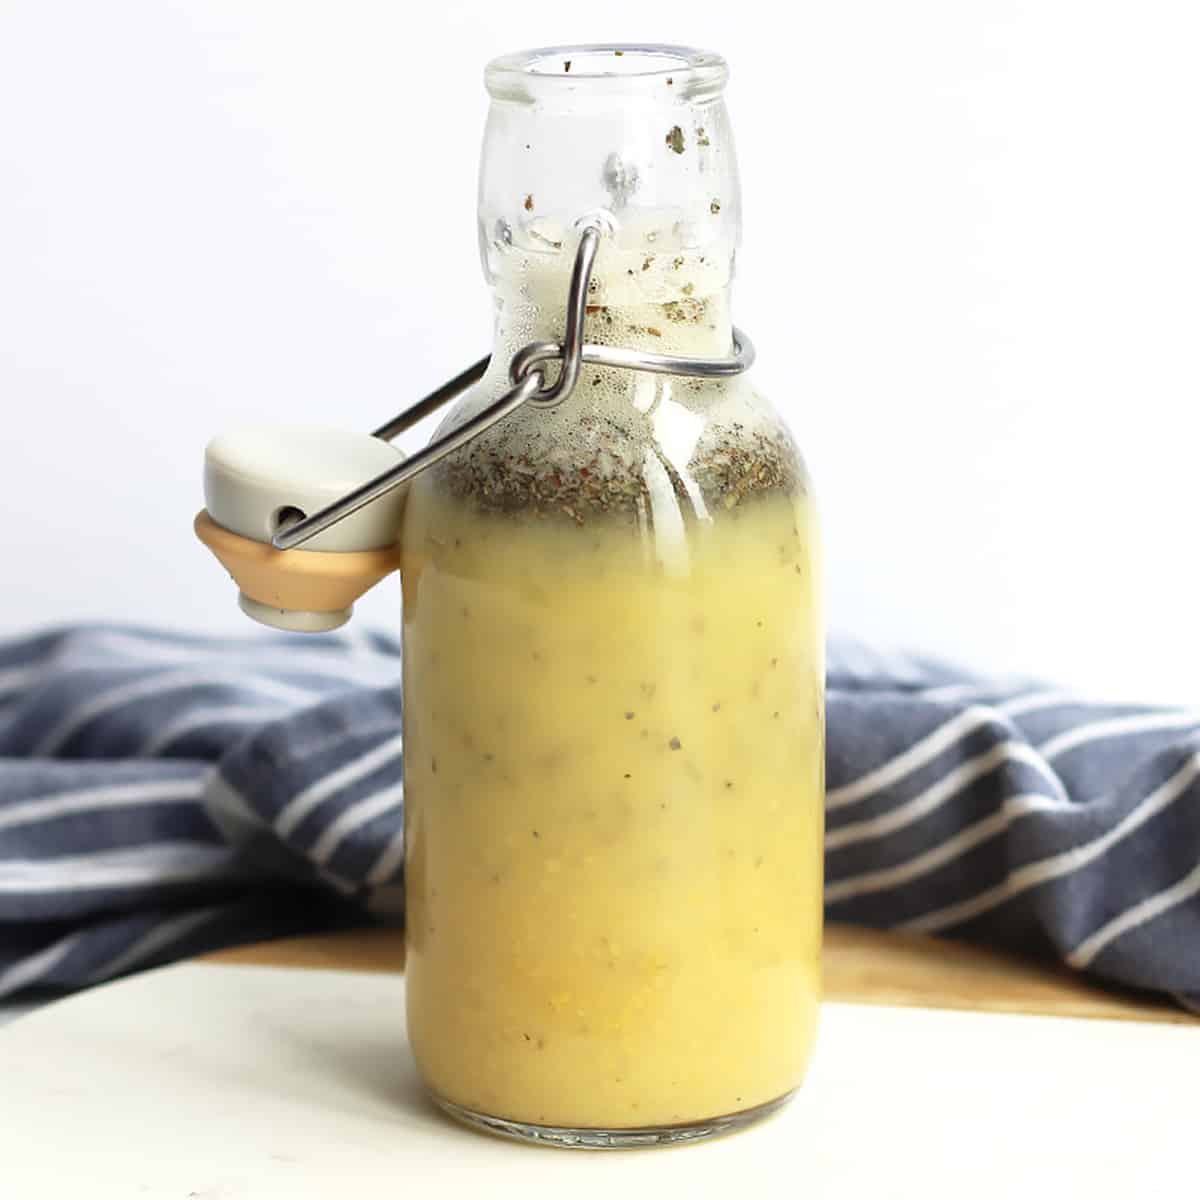 A bottle of the apple cider vinaigrette in front of a blue cloth.